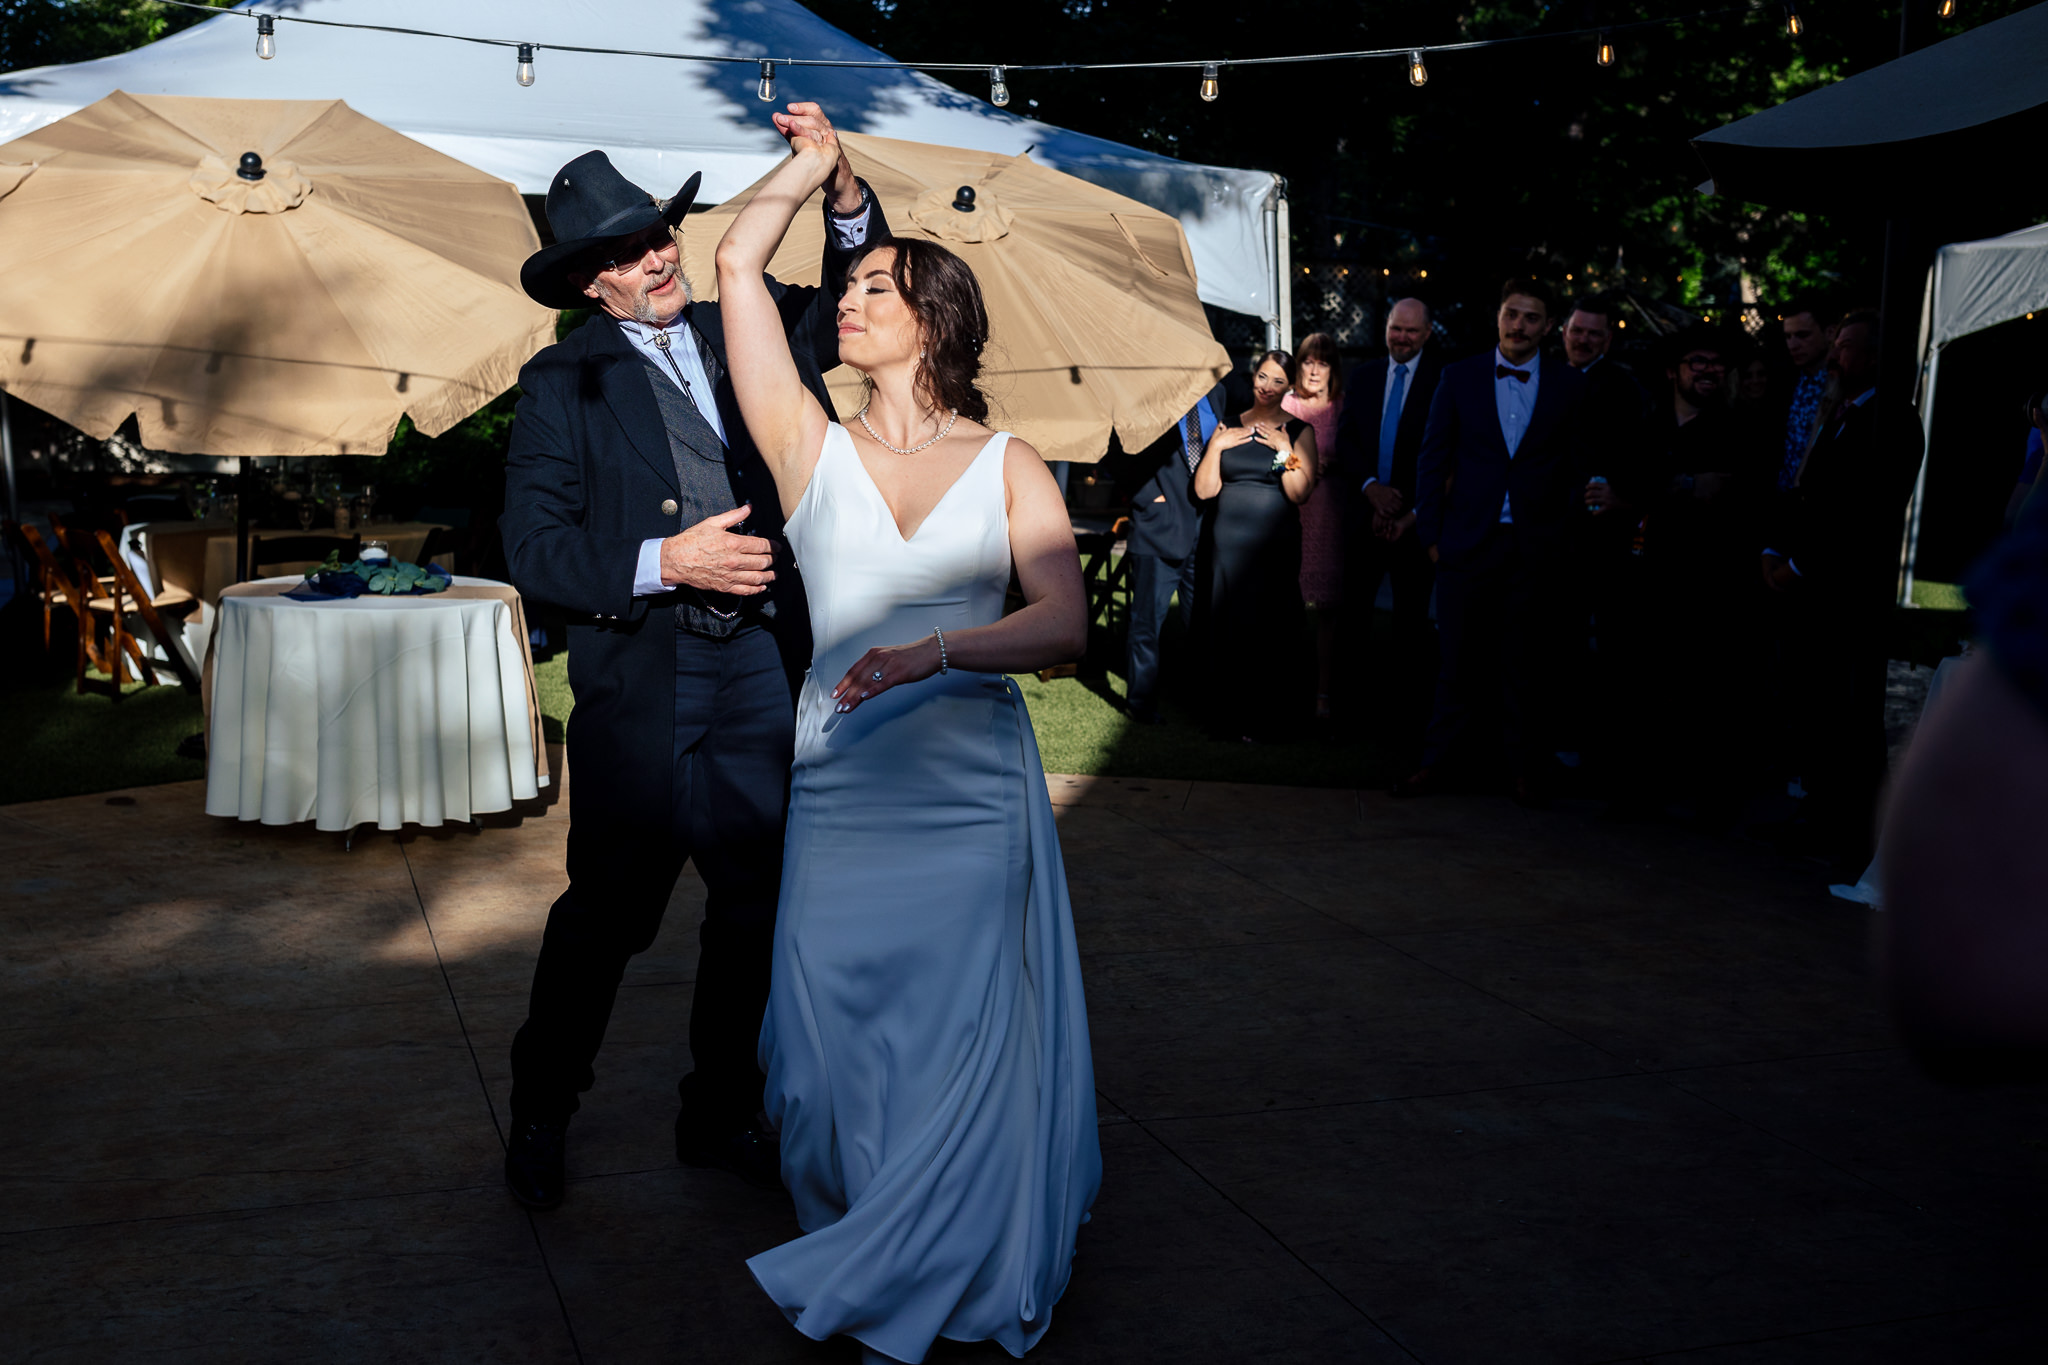 Bride & her father dancing for the Father, Daughter Dance for Haley & Gytenis' Summer Wedding at The McCreery House by Colorado Wedding Photographer, Jennifer Garza.